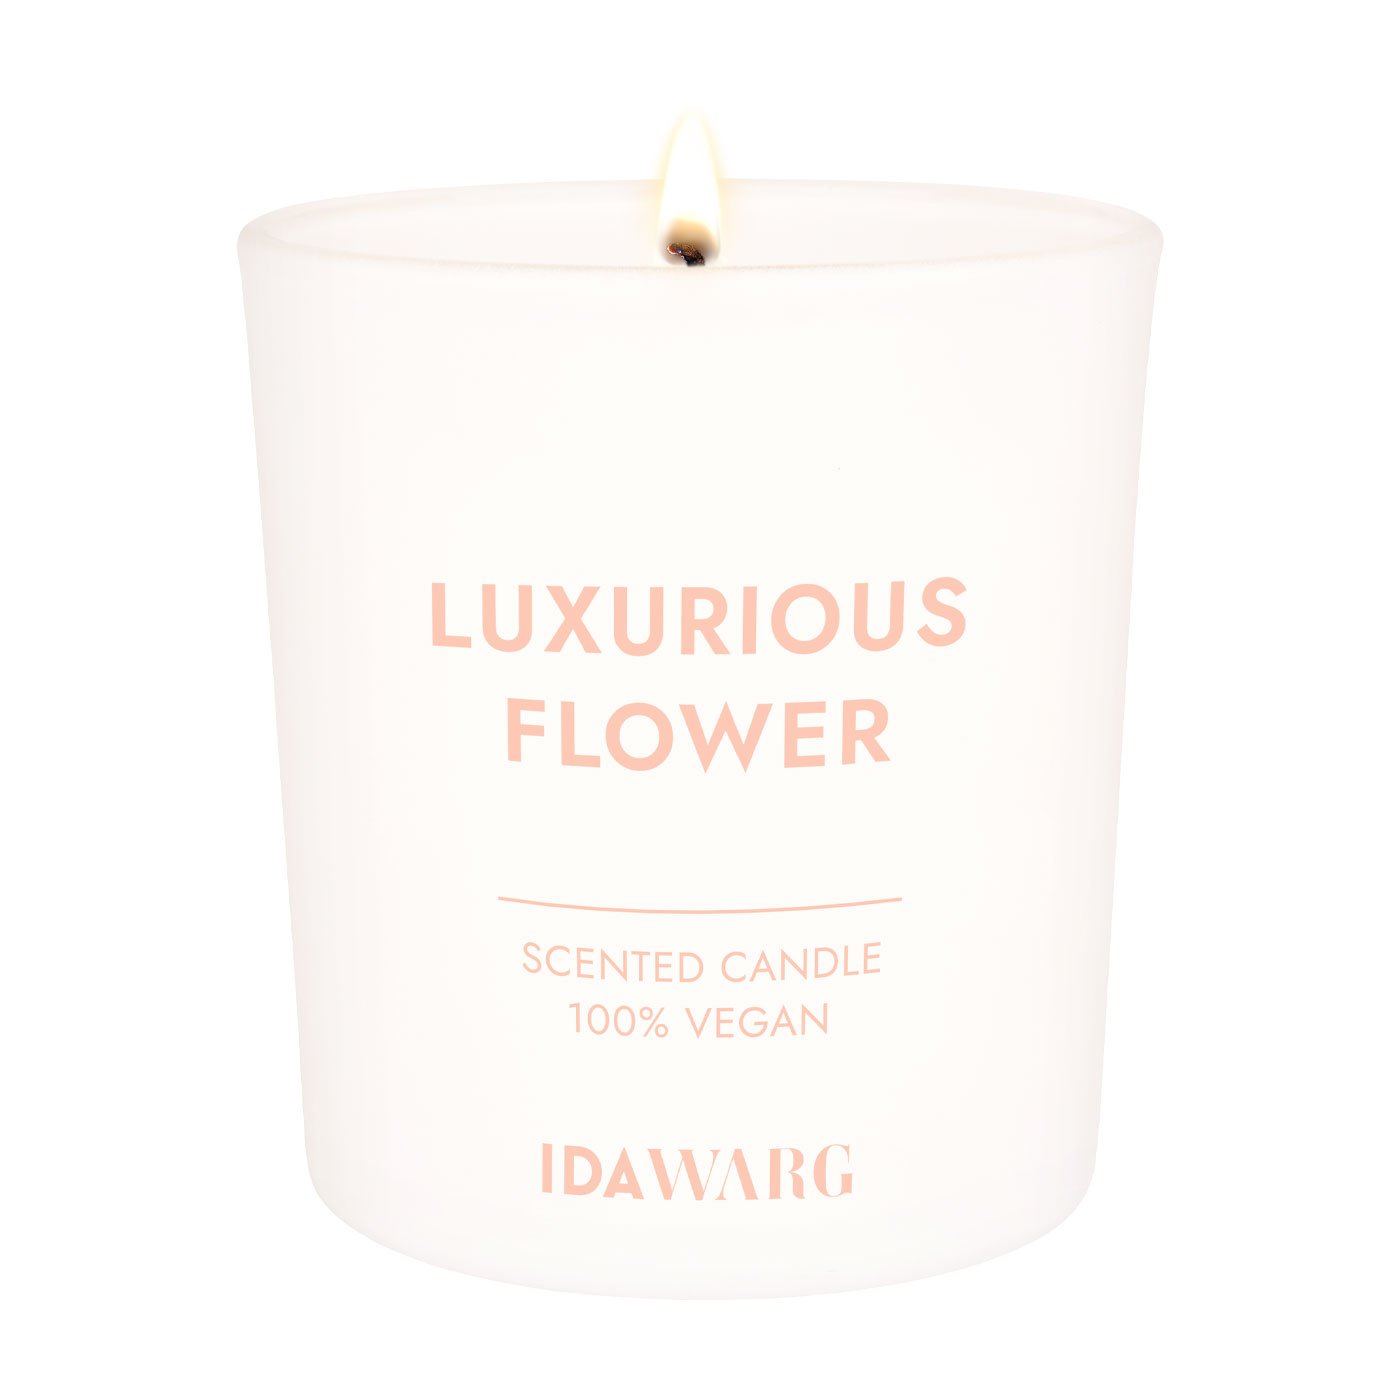 Ida Warg Beauty Luxurious Flower Scented Candle 140g